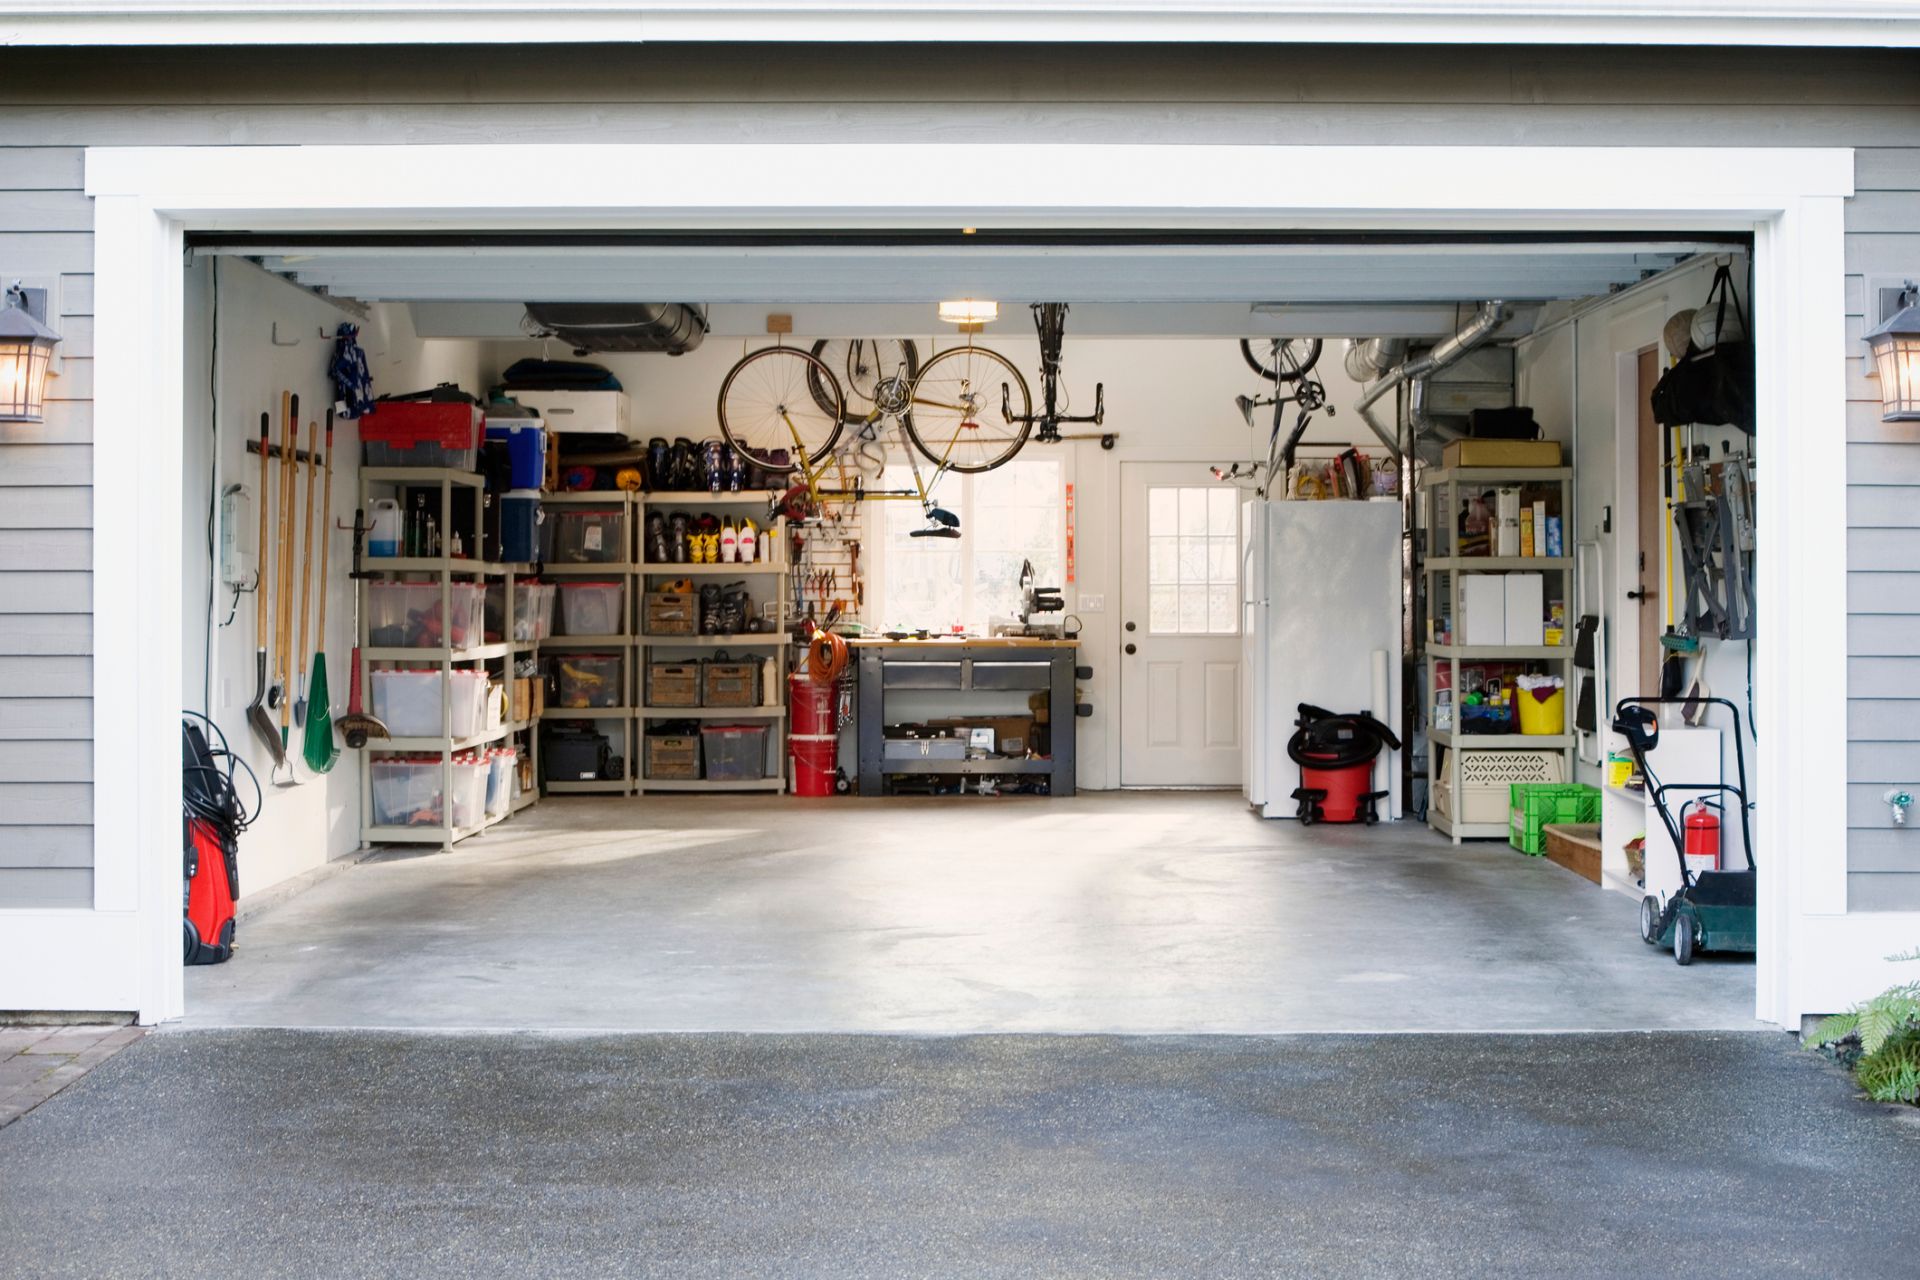 Are Concrete Garages Any Good | Concrete Garage With Tools Inside